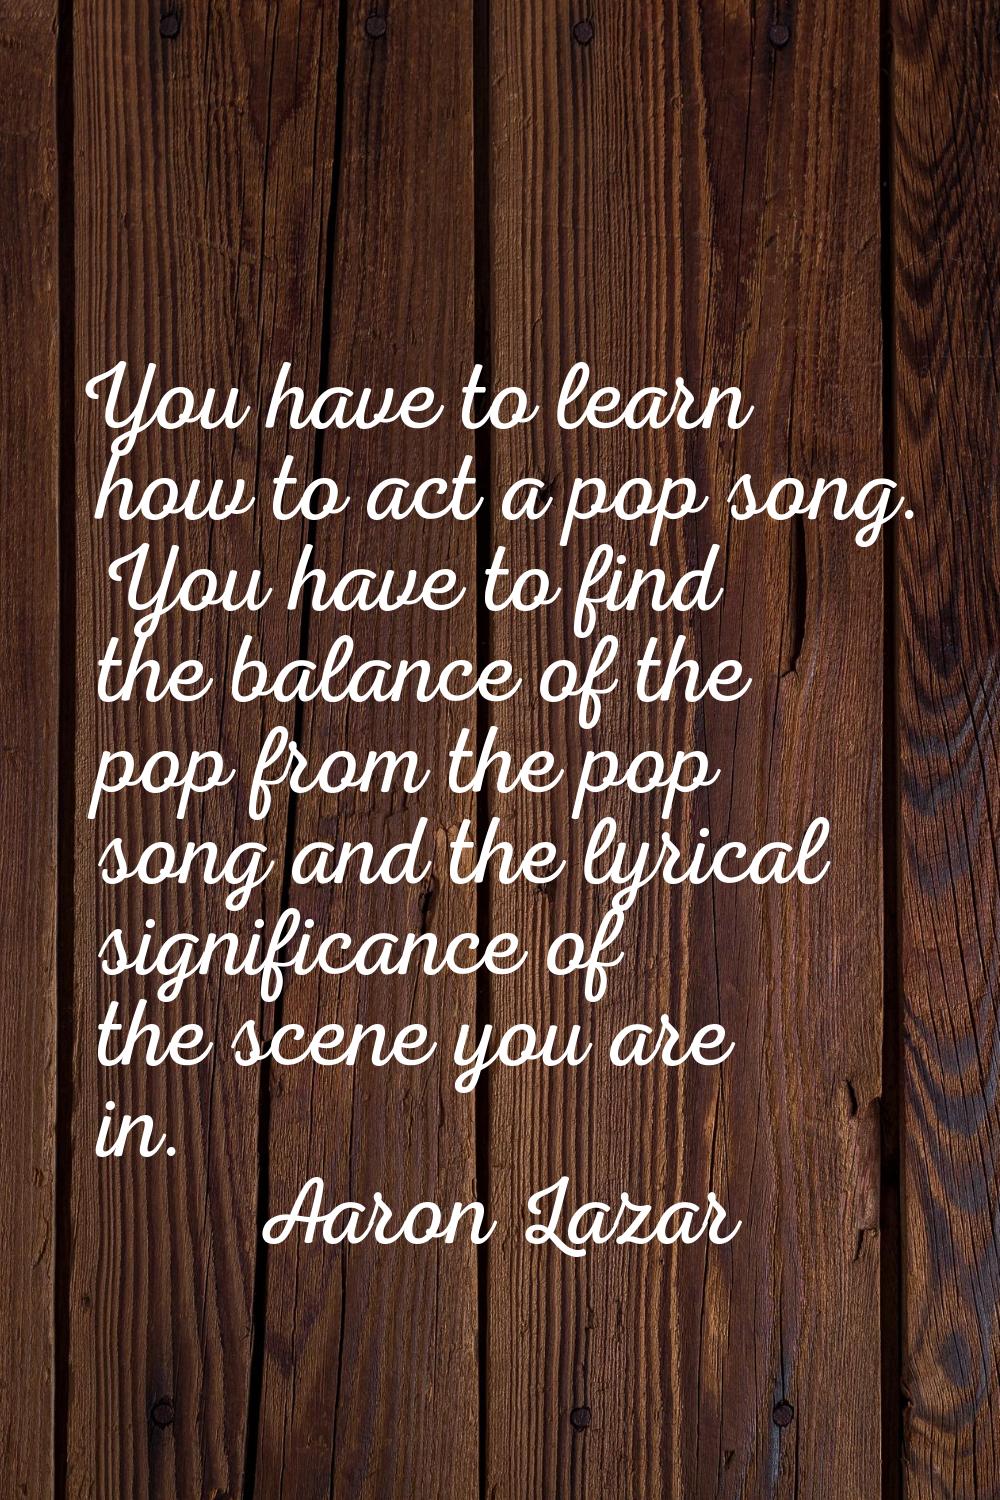 You have to learn how to act a pop song. You have to find the balance of the pop from the pop song 